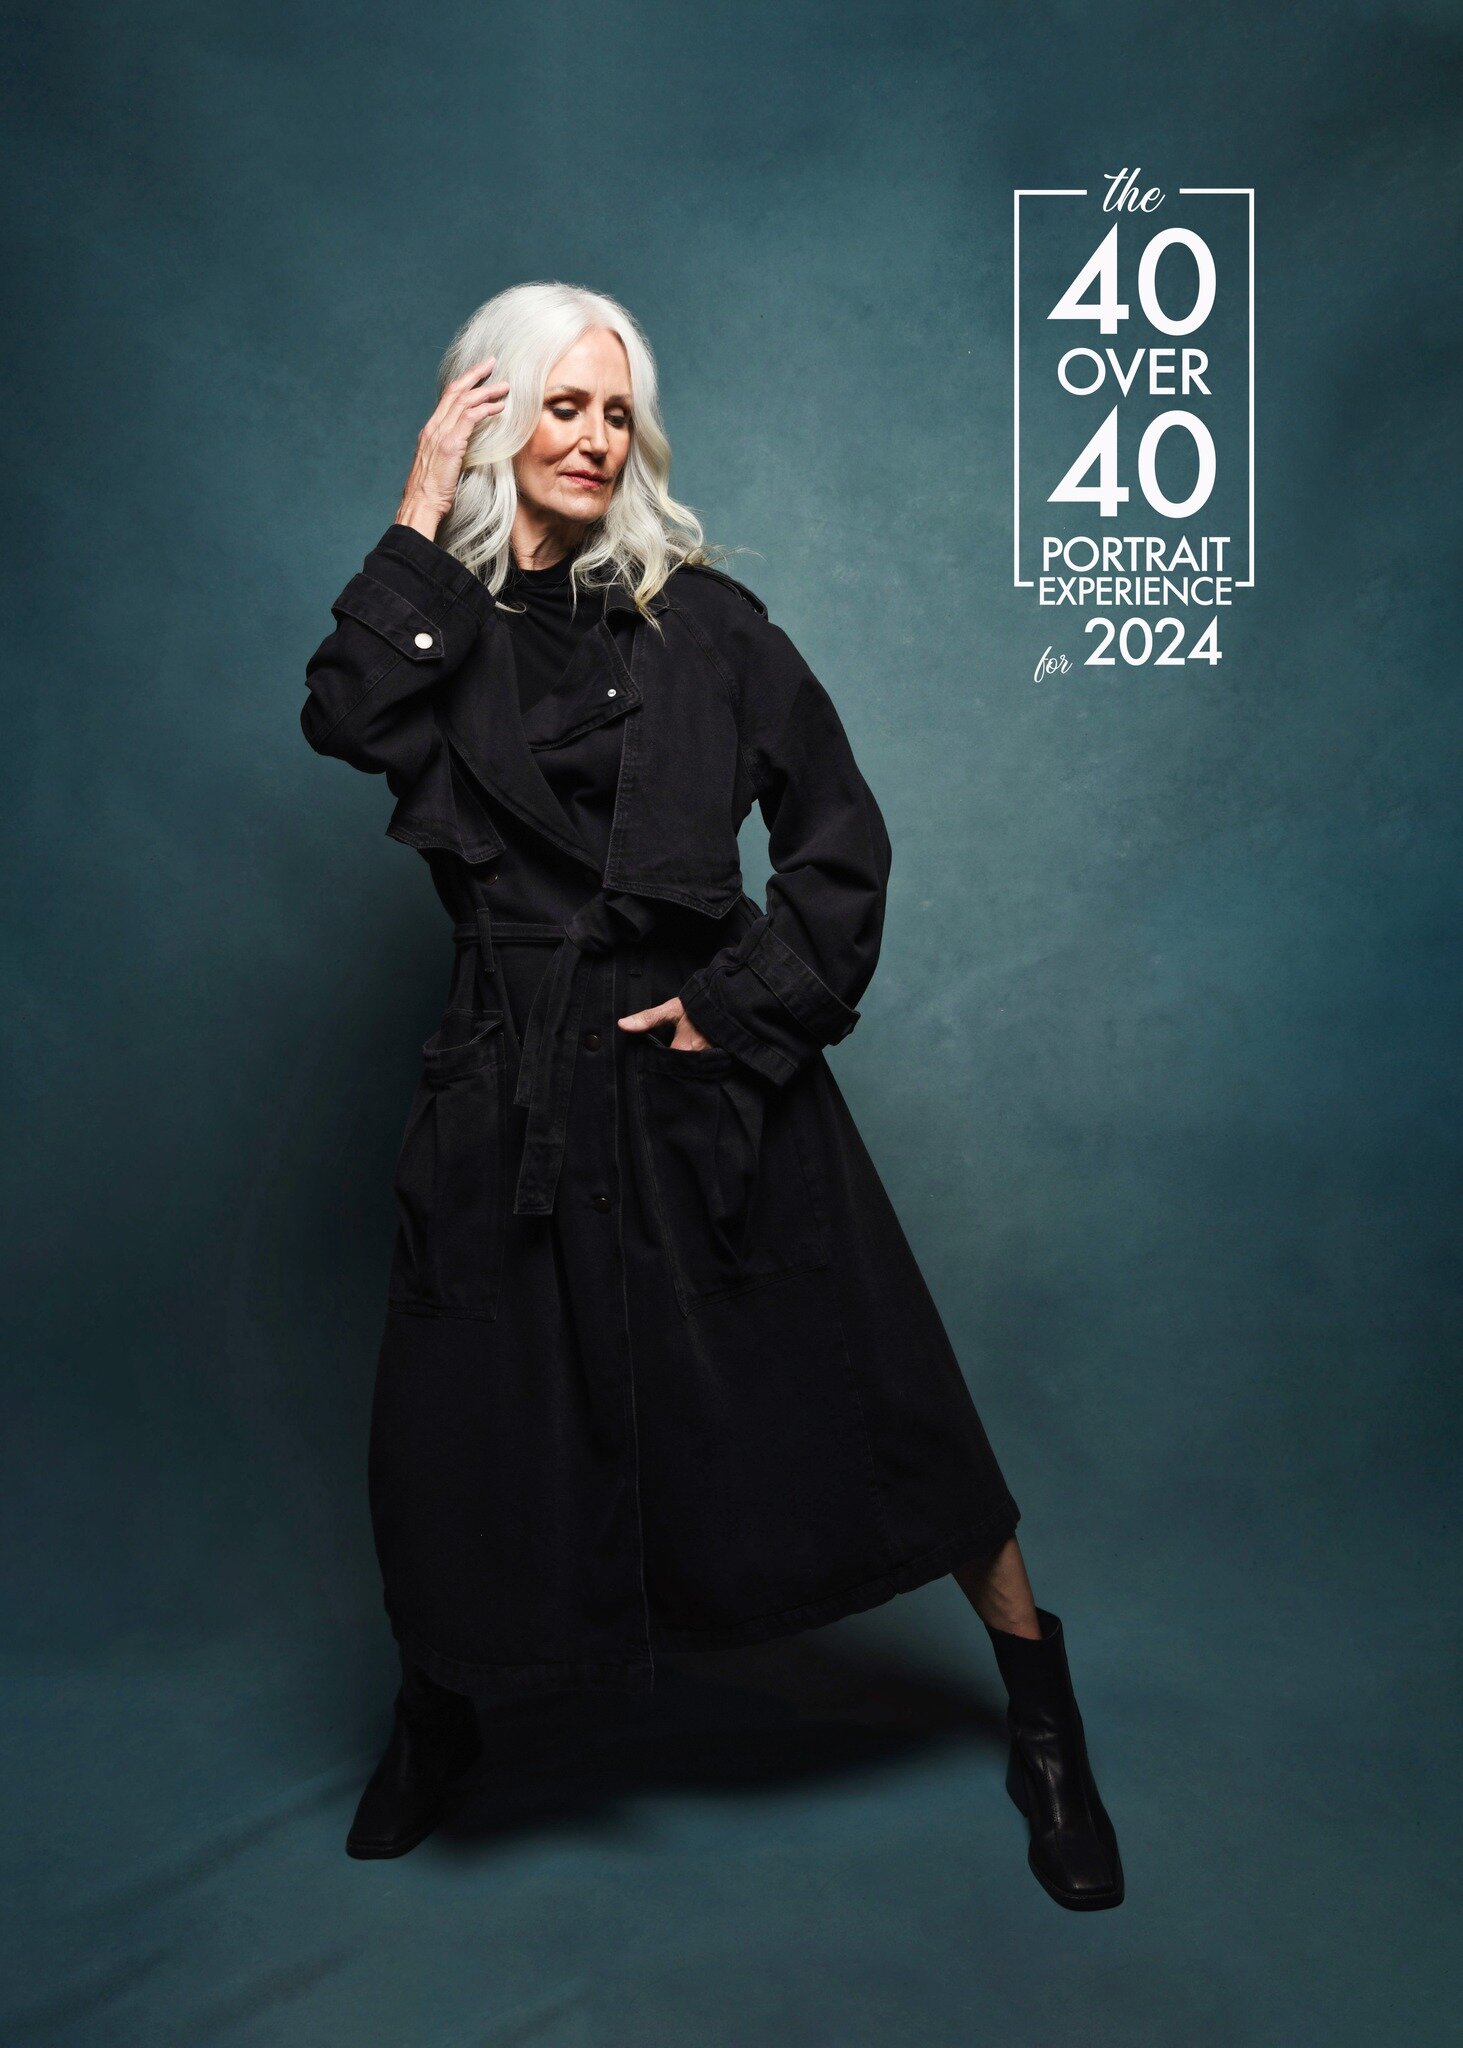 Only 20 spots remain for the empowering 40 over 40 Portrait Experience!

Imagine stepping into a world where your essence shines brighter than ever before, where your story unfolds like a cherished novel, and where your confidence soars to new height